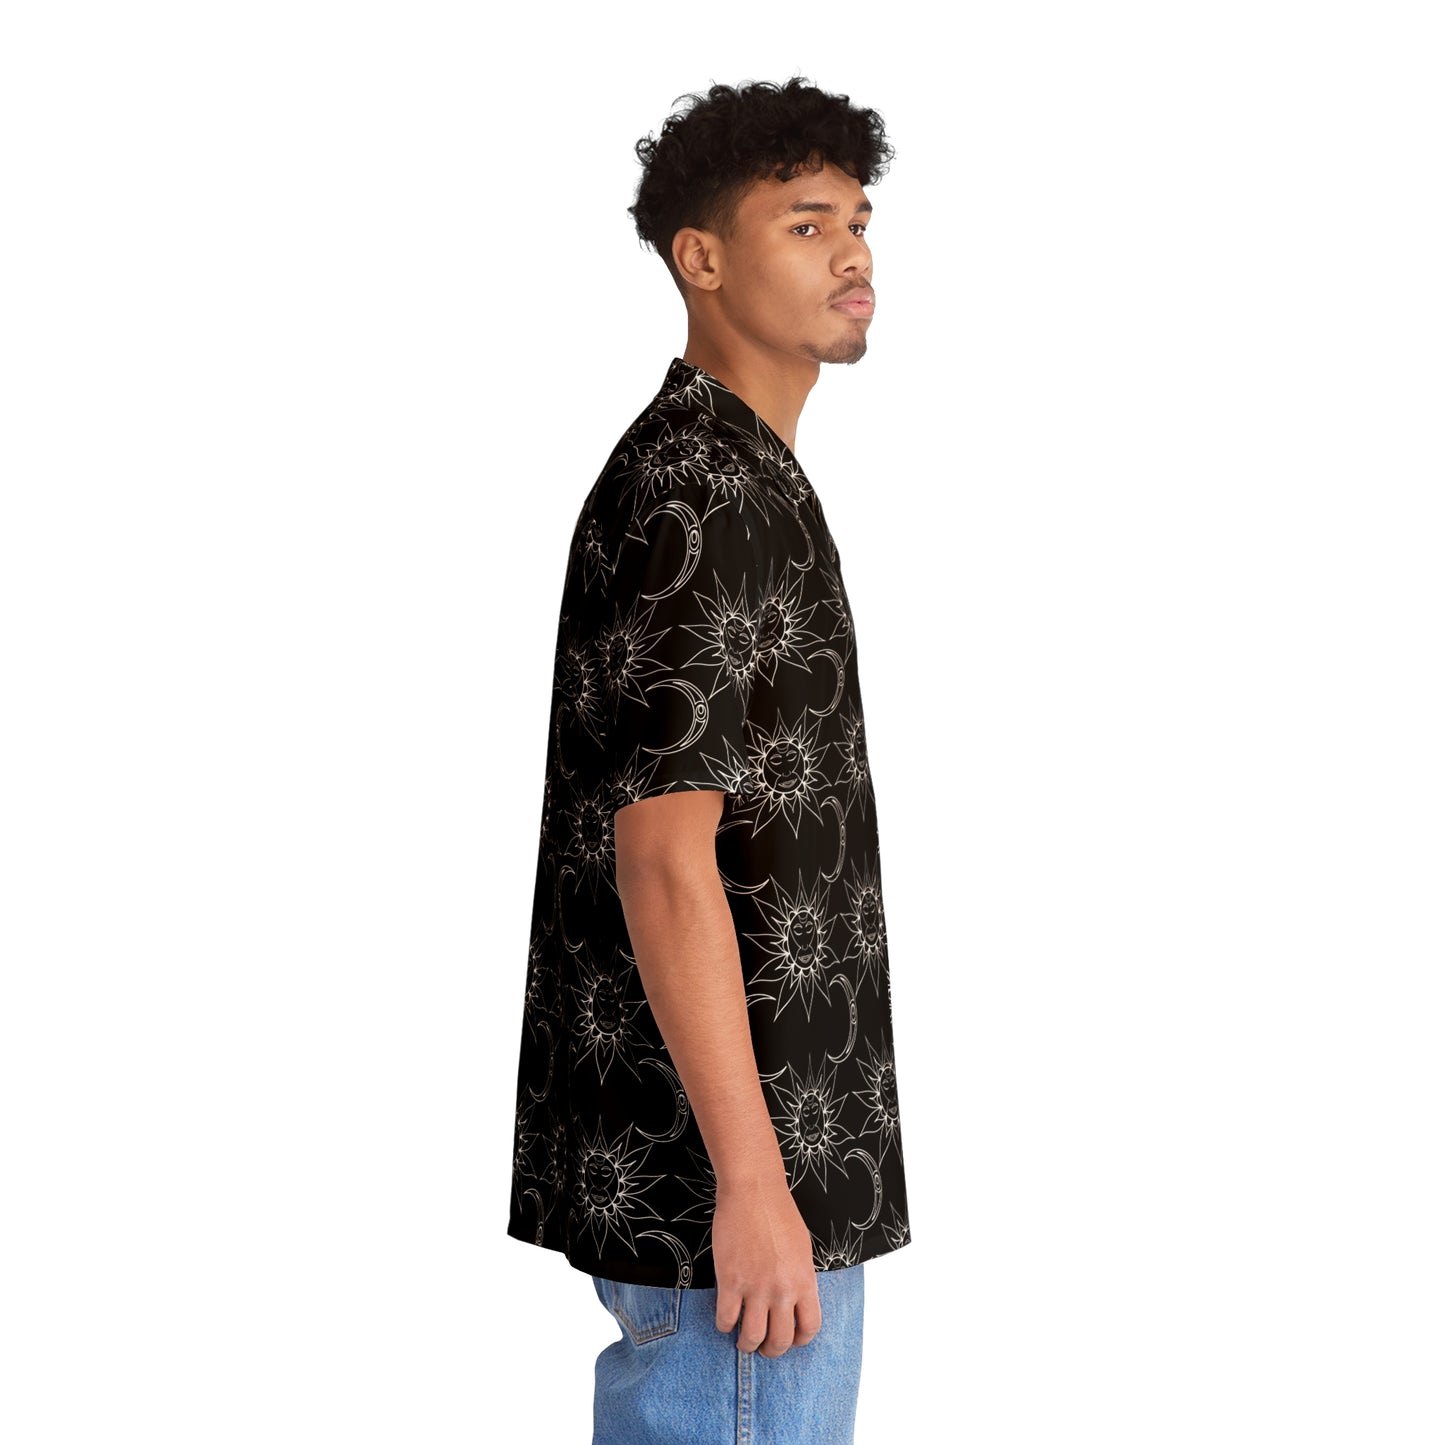 Sun and Moon Button Up